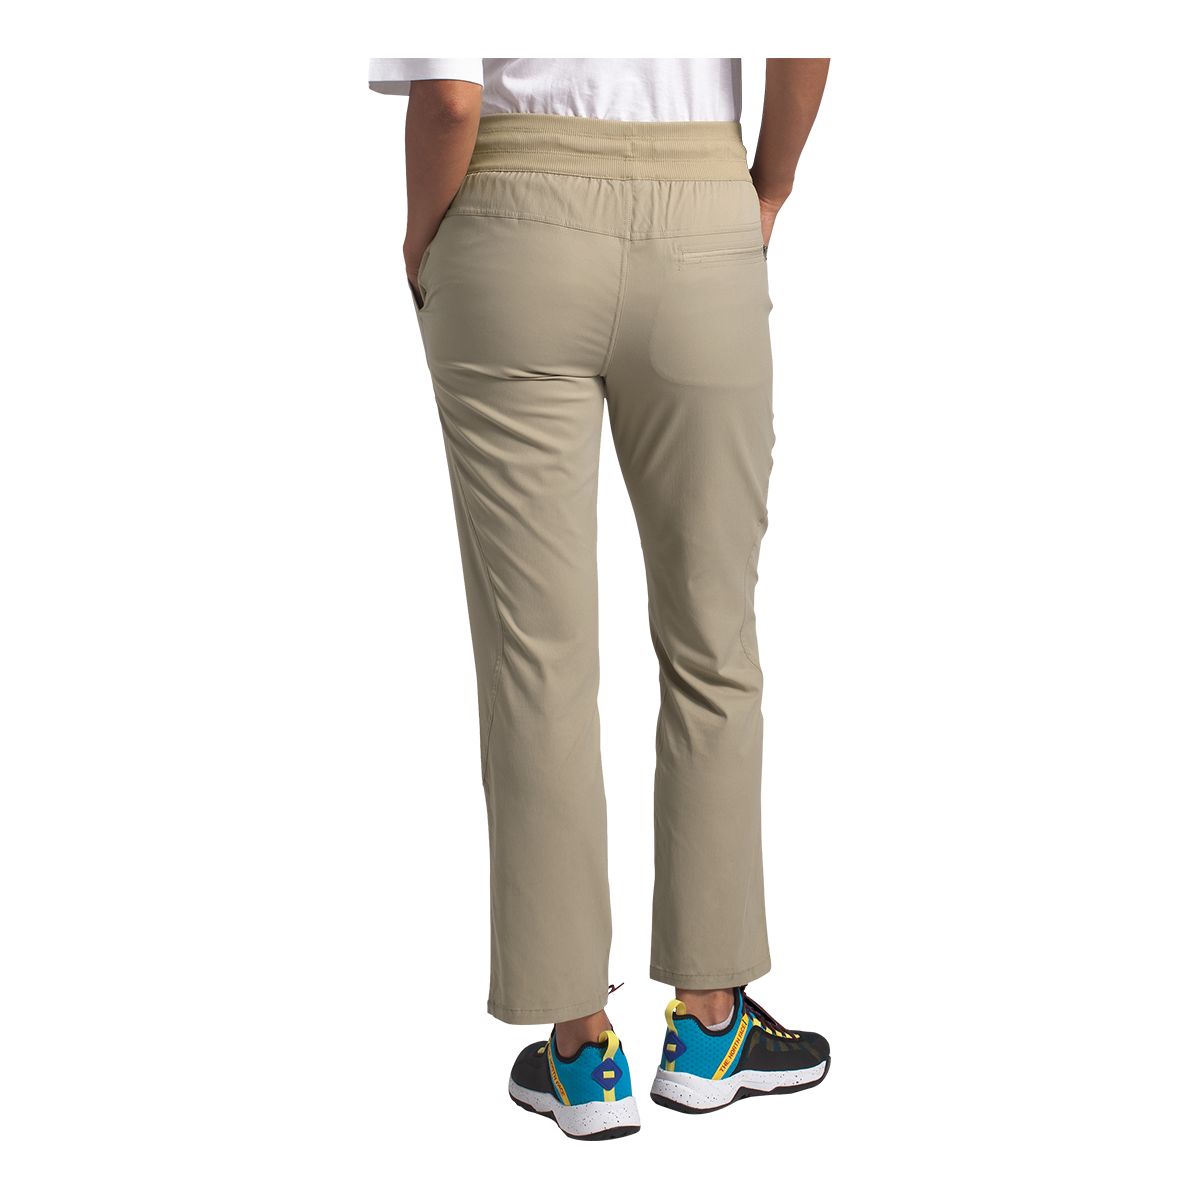  THE NORTH FACE Women's Aphrodite Motion Capri Pants (Standard  and Plus Size), Twill Beige, X-Small : Clothing, Shoes & Jewelry